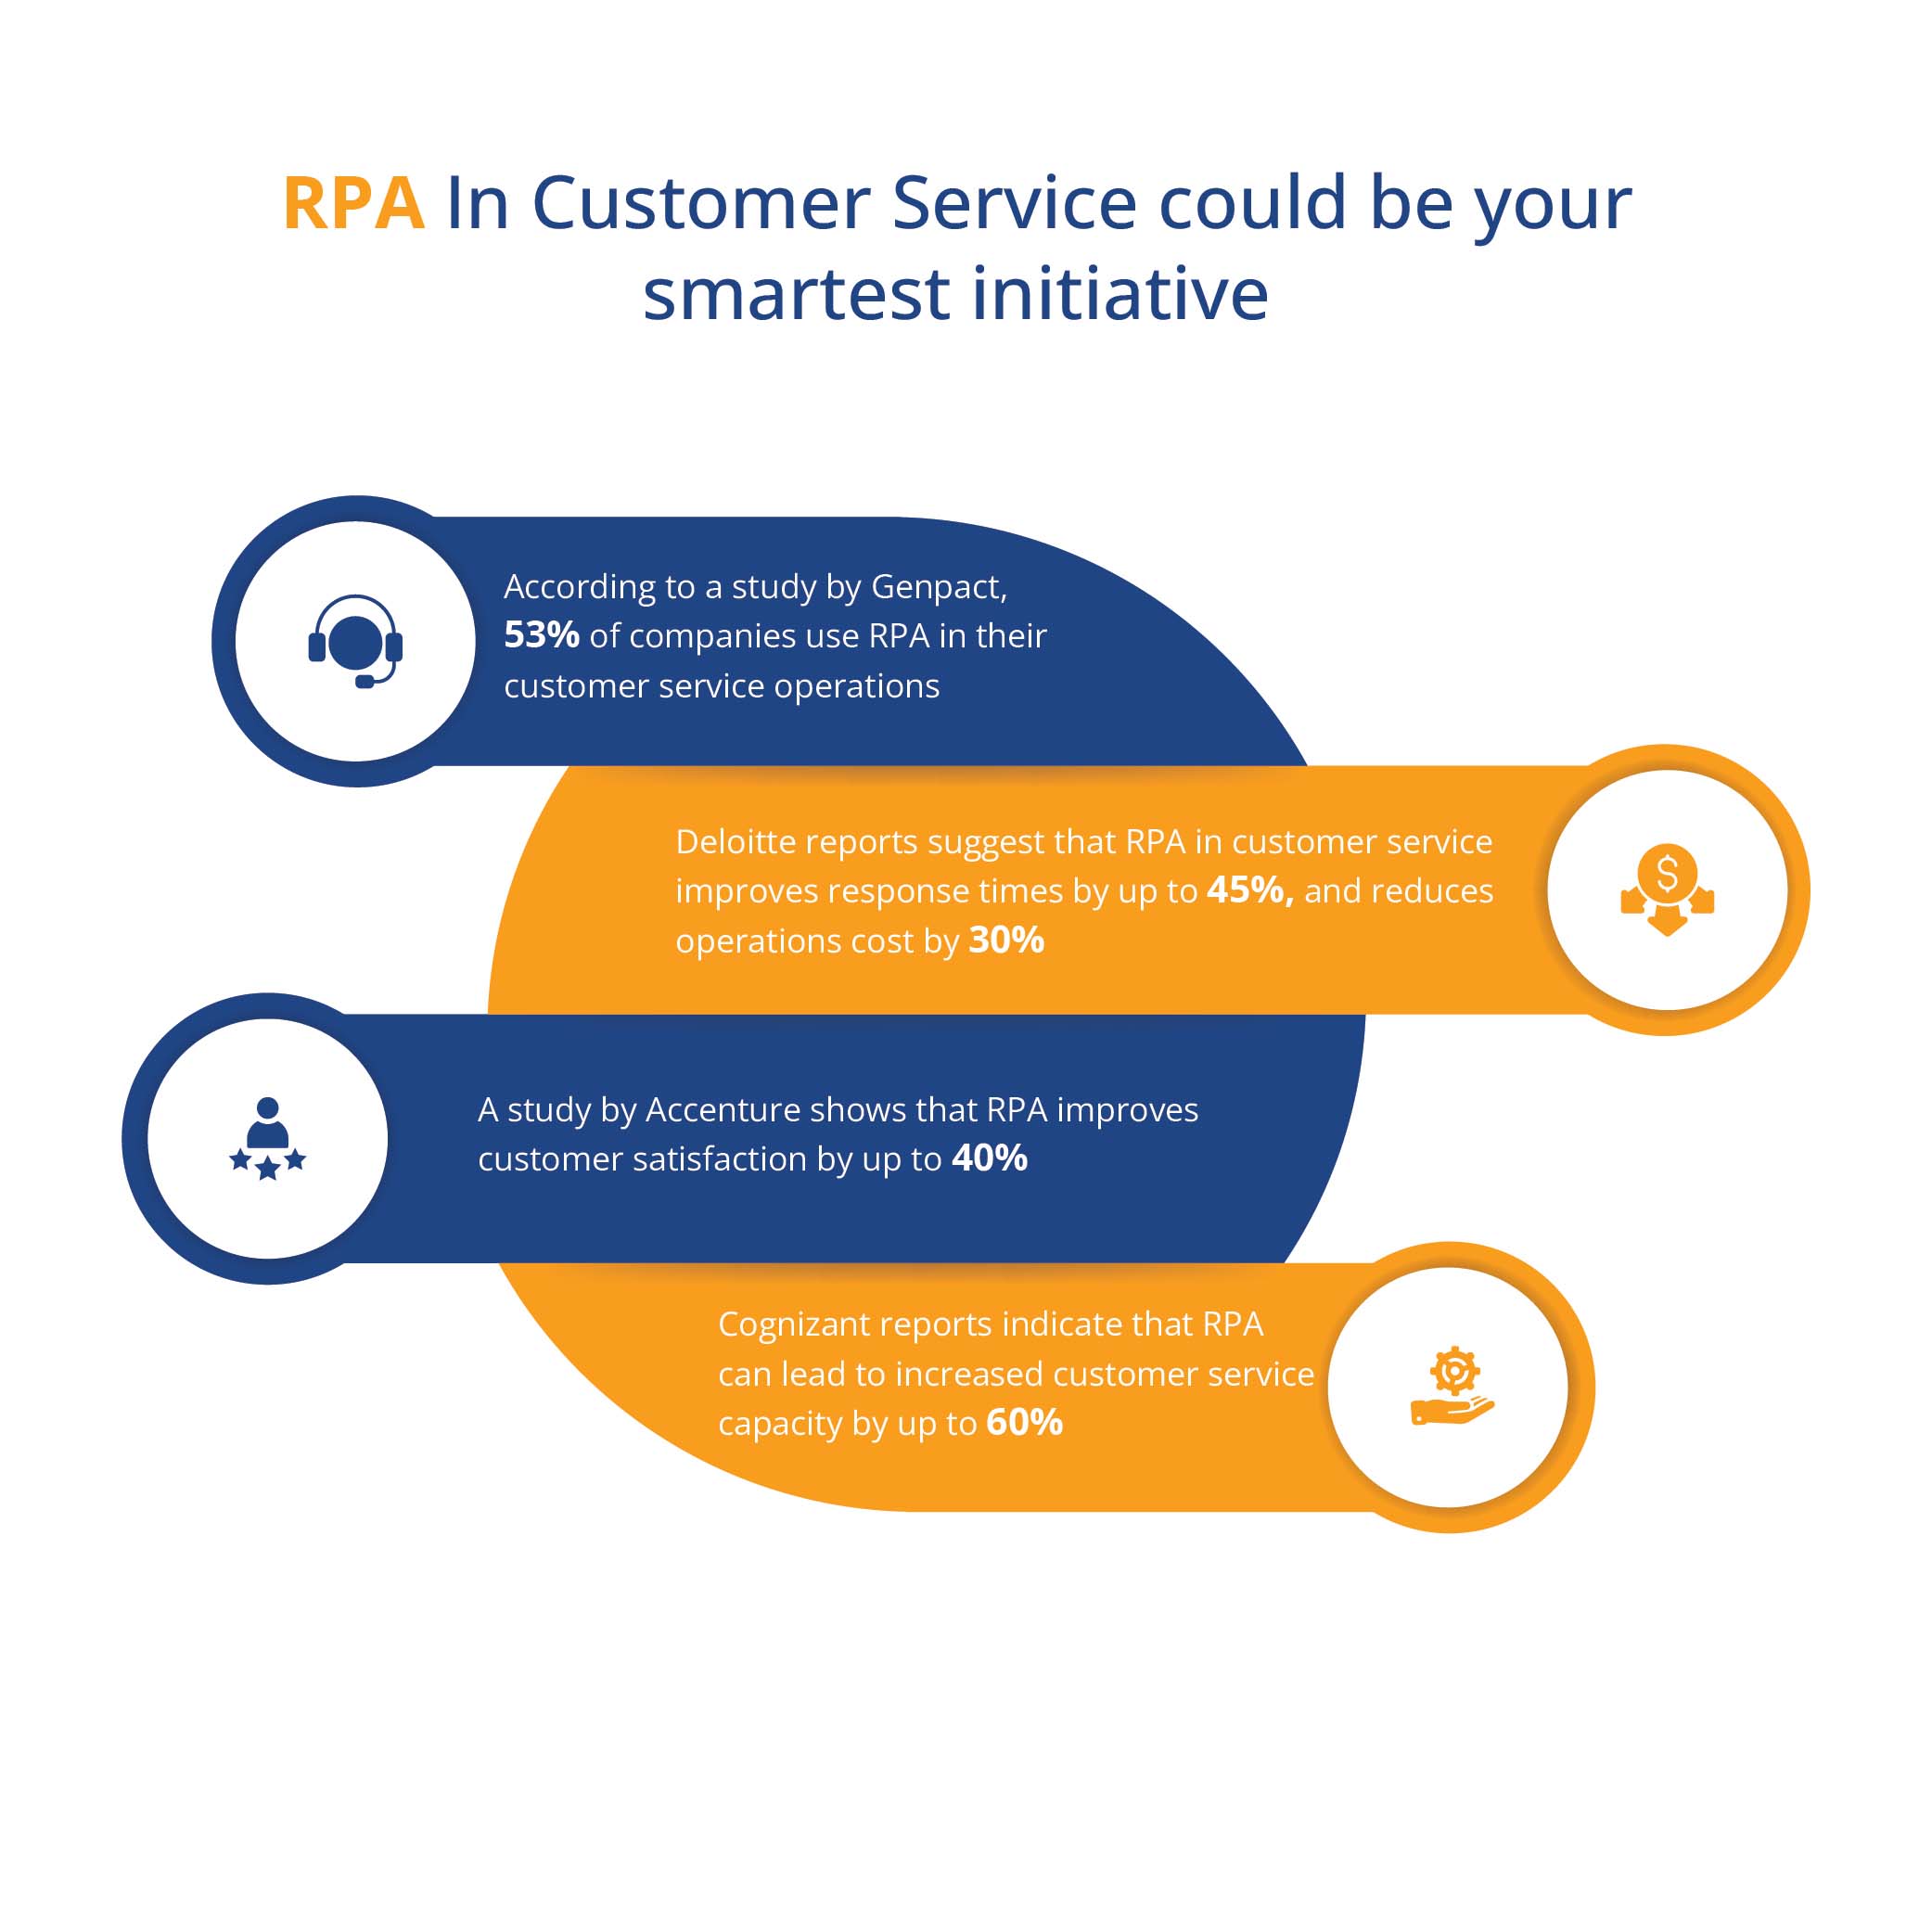 rpa-customer-services-infographic